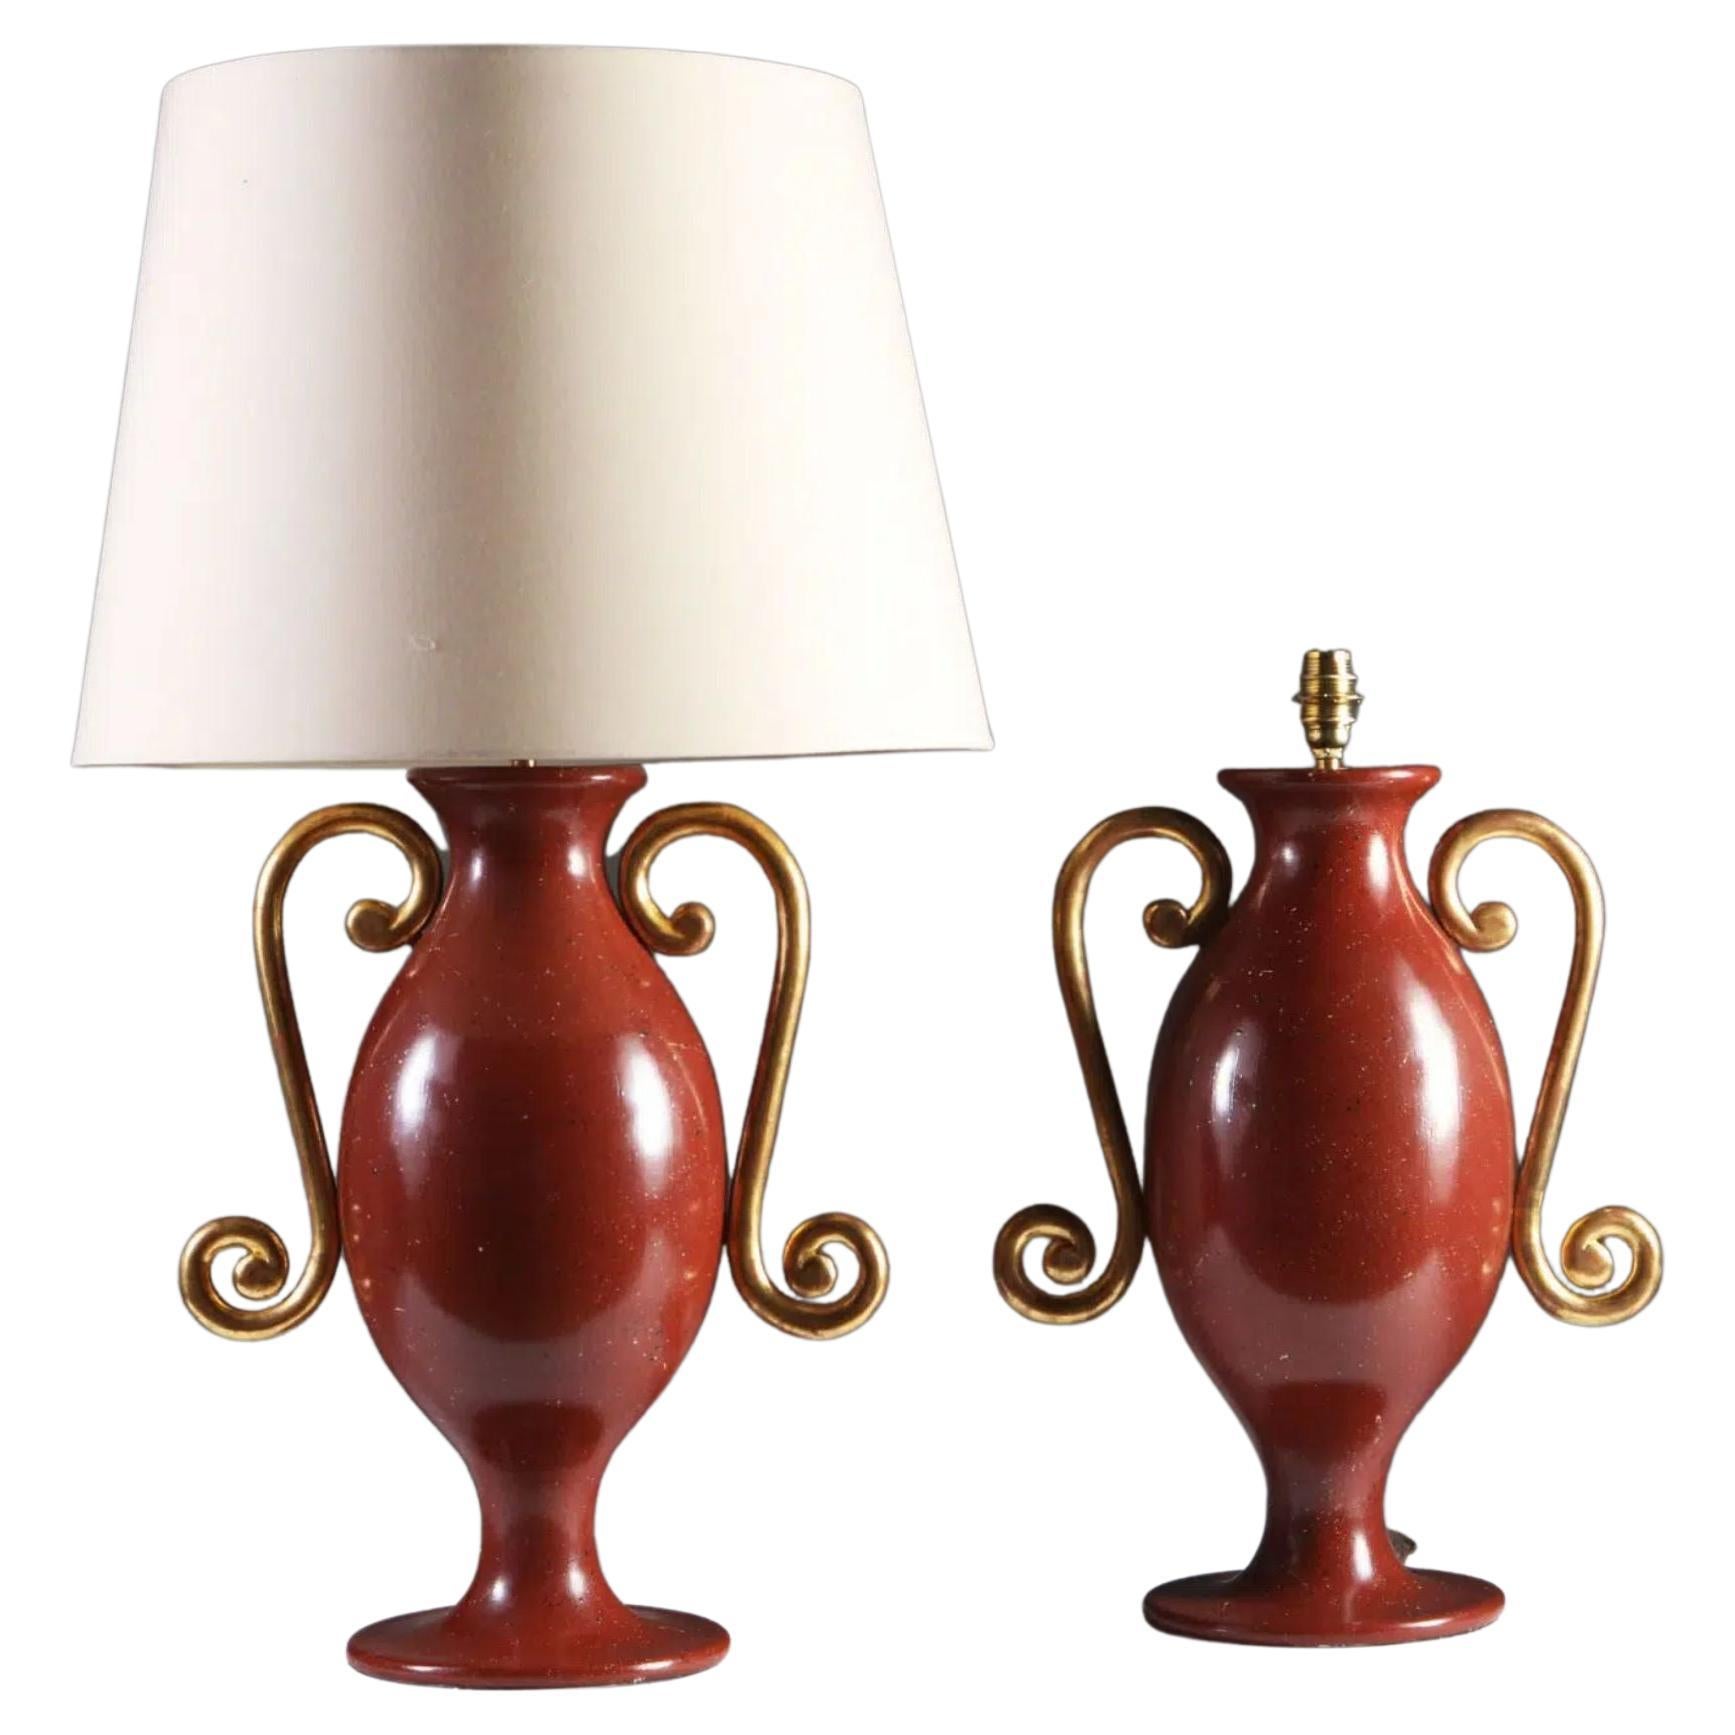 Pair of Faux Porphyry Painted Baluster Vases as Table Lamps